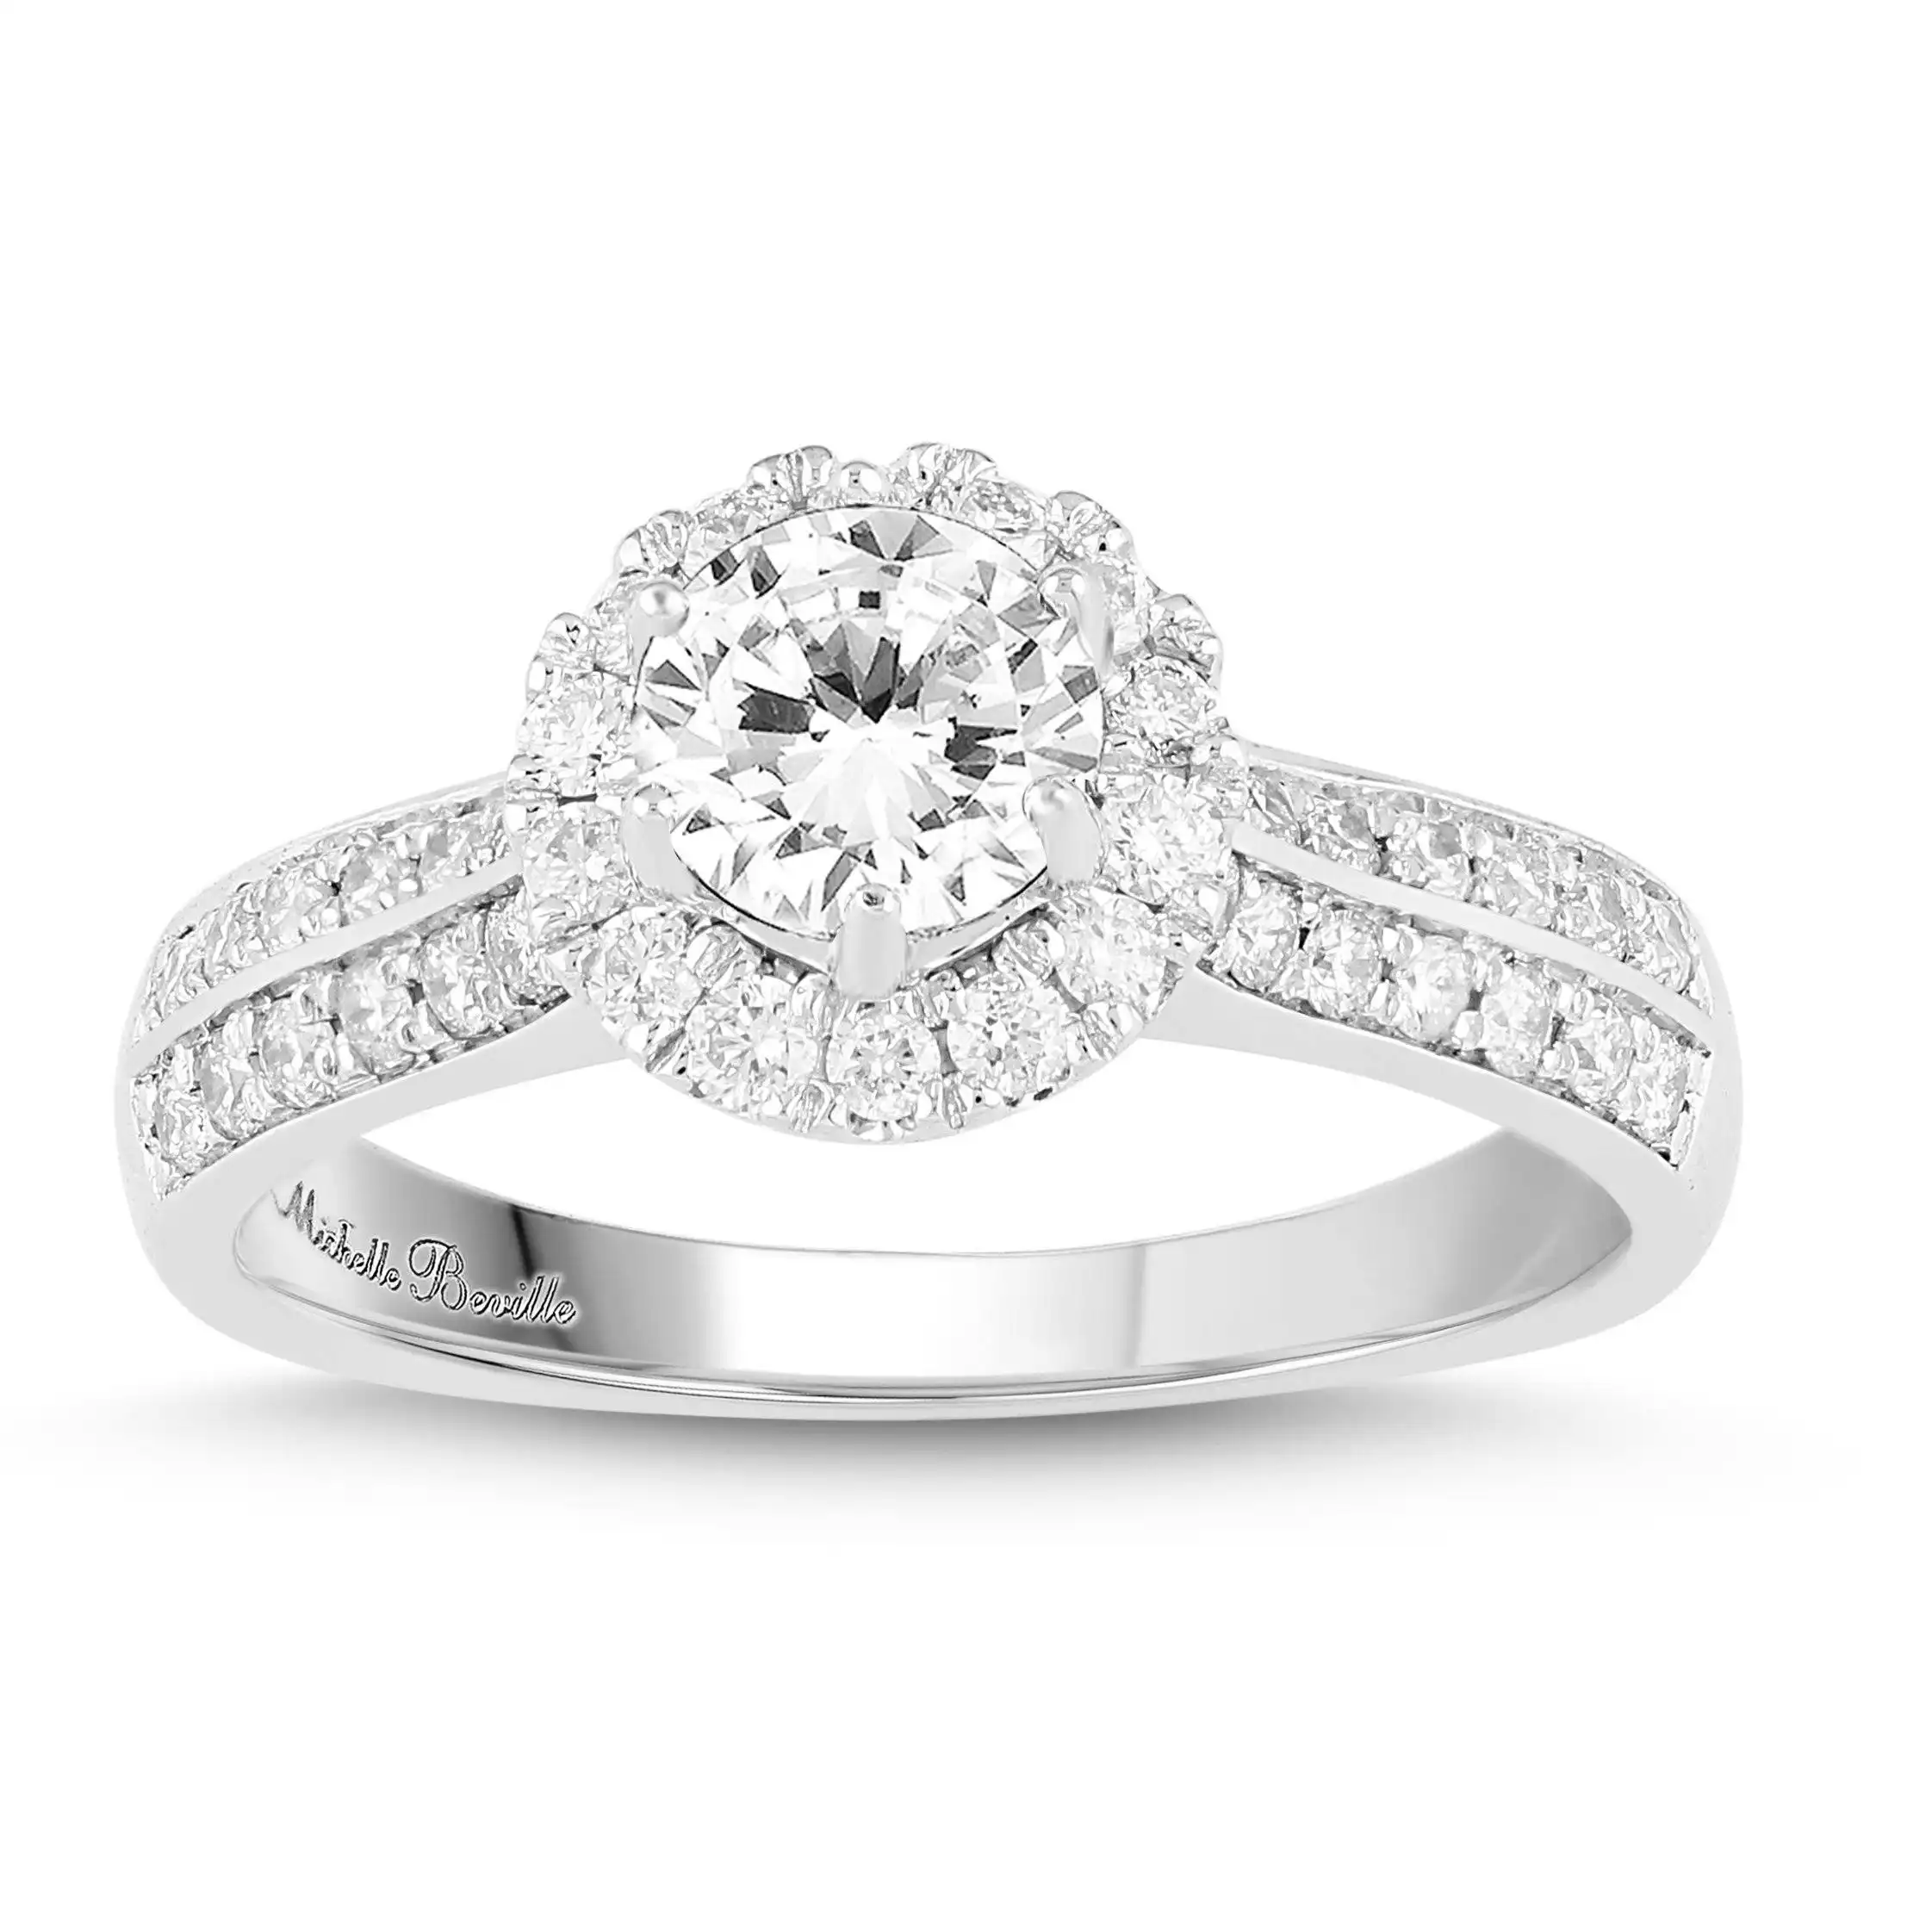 Love by Michelle Beville Halo Solitaire Ring with 1.00ct of Diamonds in 18ct White Gold